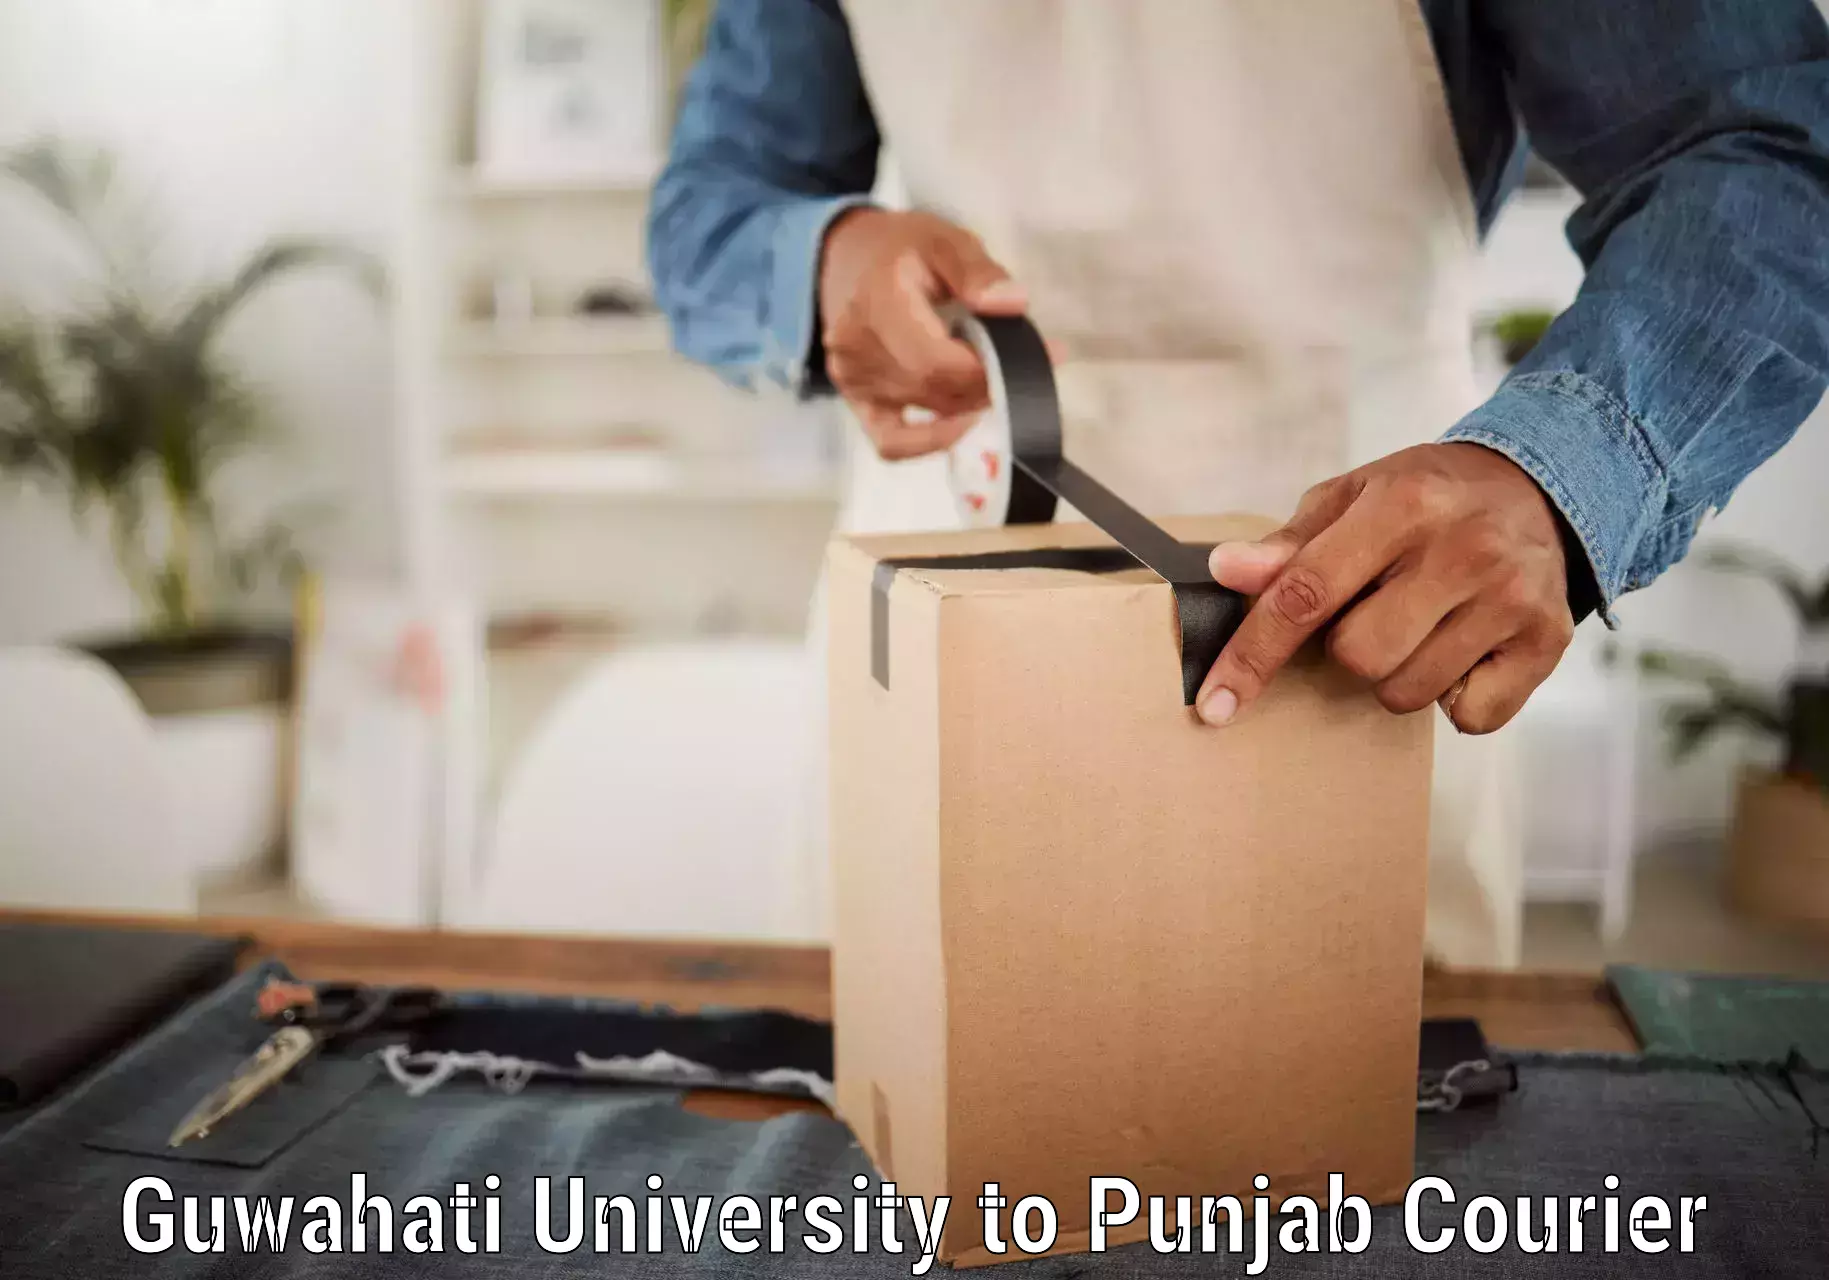 Small parcel delivery Guwahati University to Central University of Punjab Bathinda